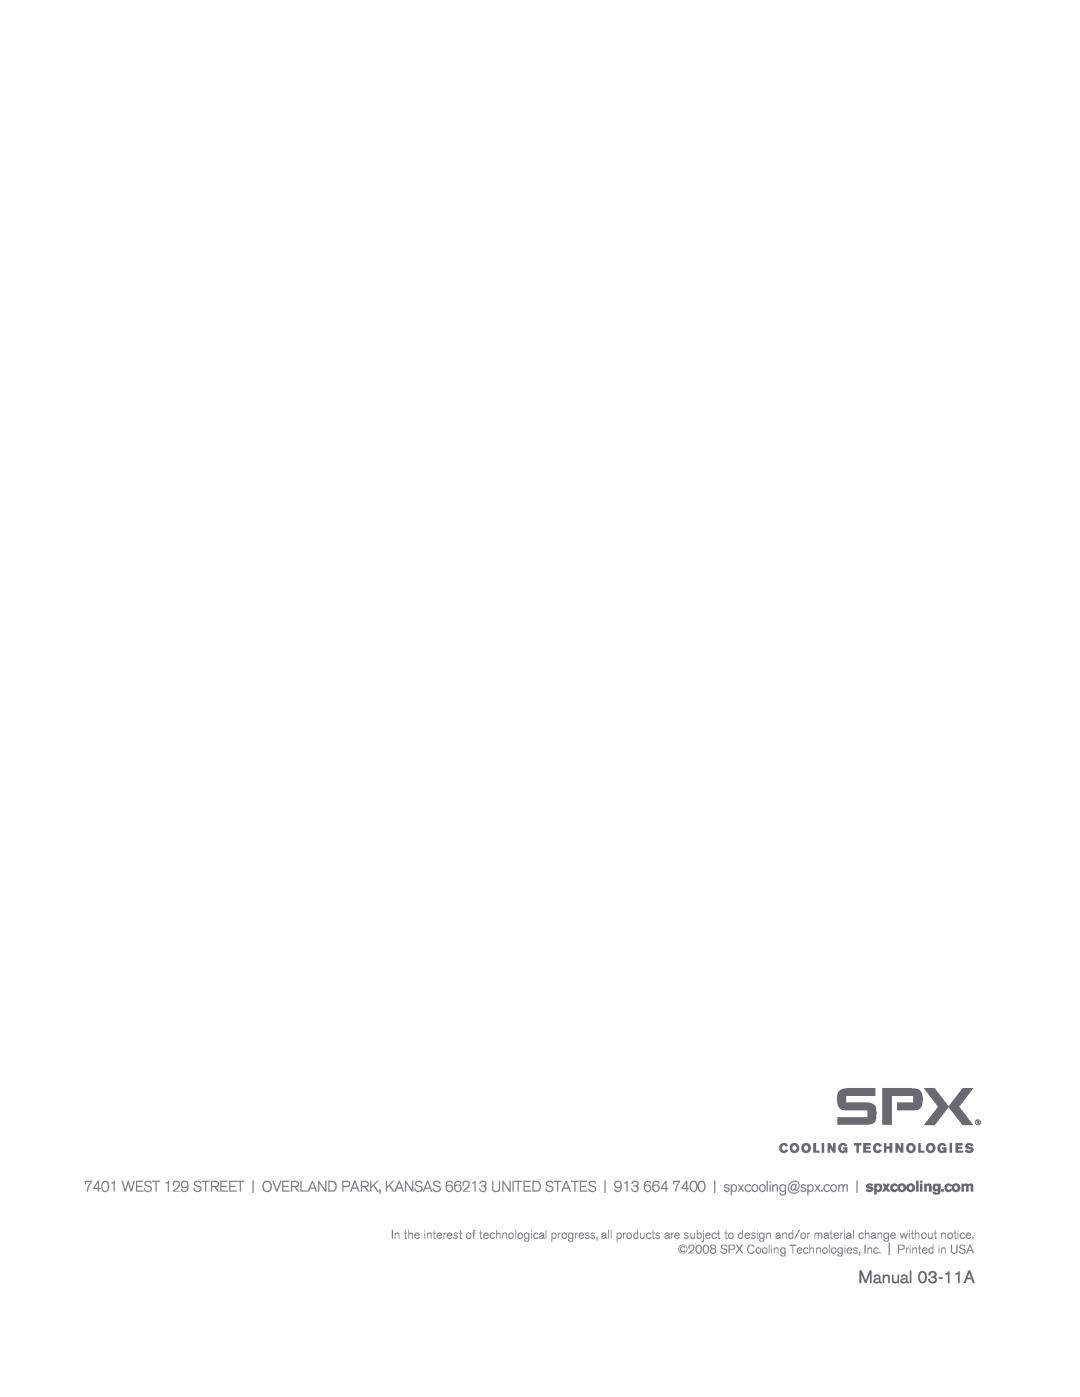 SPX Cooling Technologies user manual Manual 03-11A 